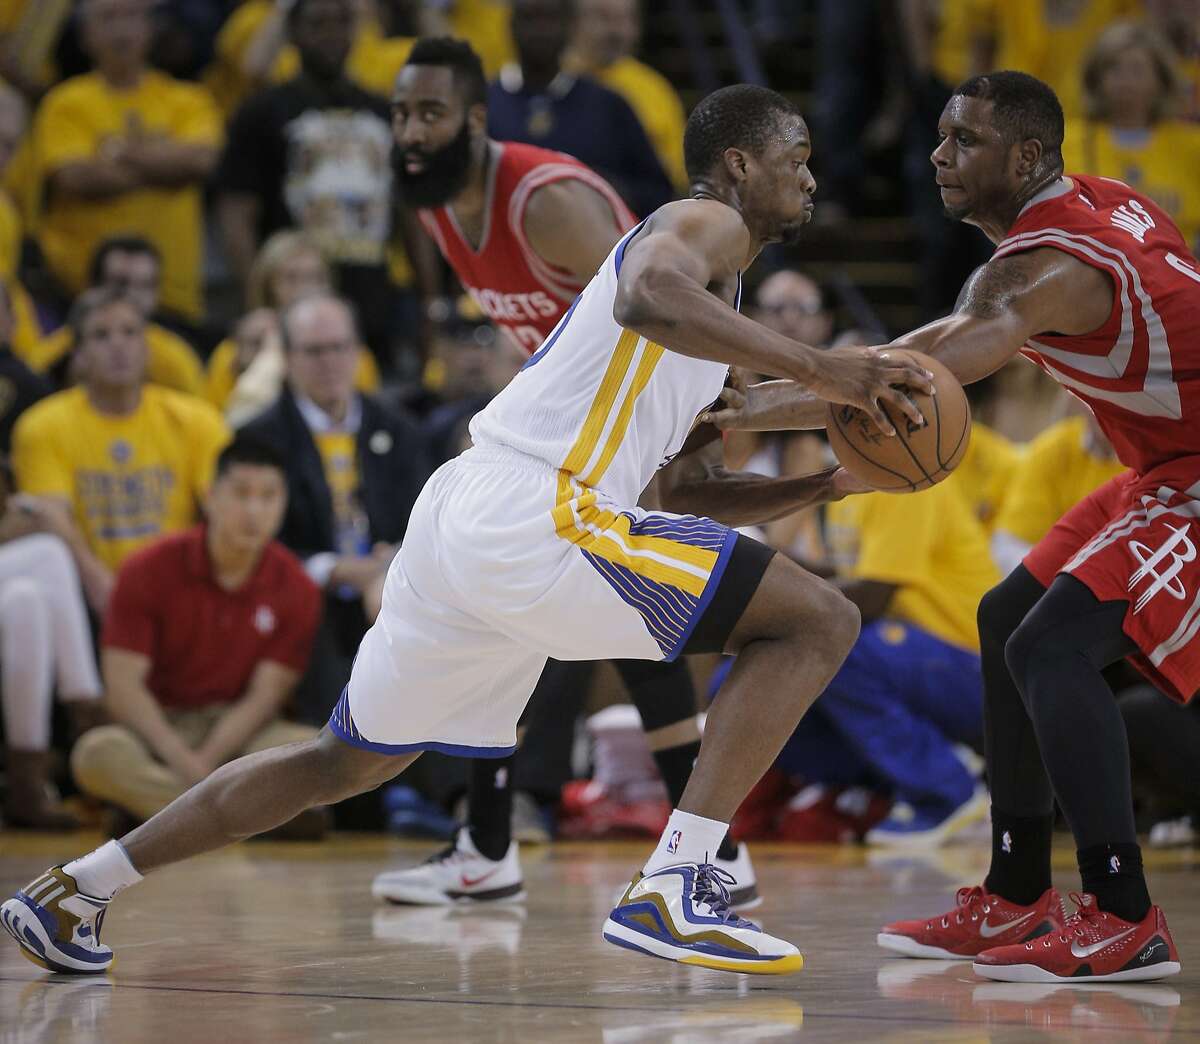 Golden State Warriorsâ€™ Harrison Barnes drives towards the basket in the fourth period during Game 5 of the Western Conference Finals on Wednesday, May 27, 2015 in Oakland, Calif.